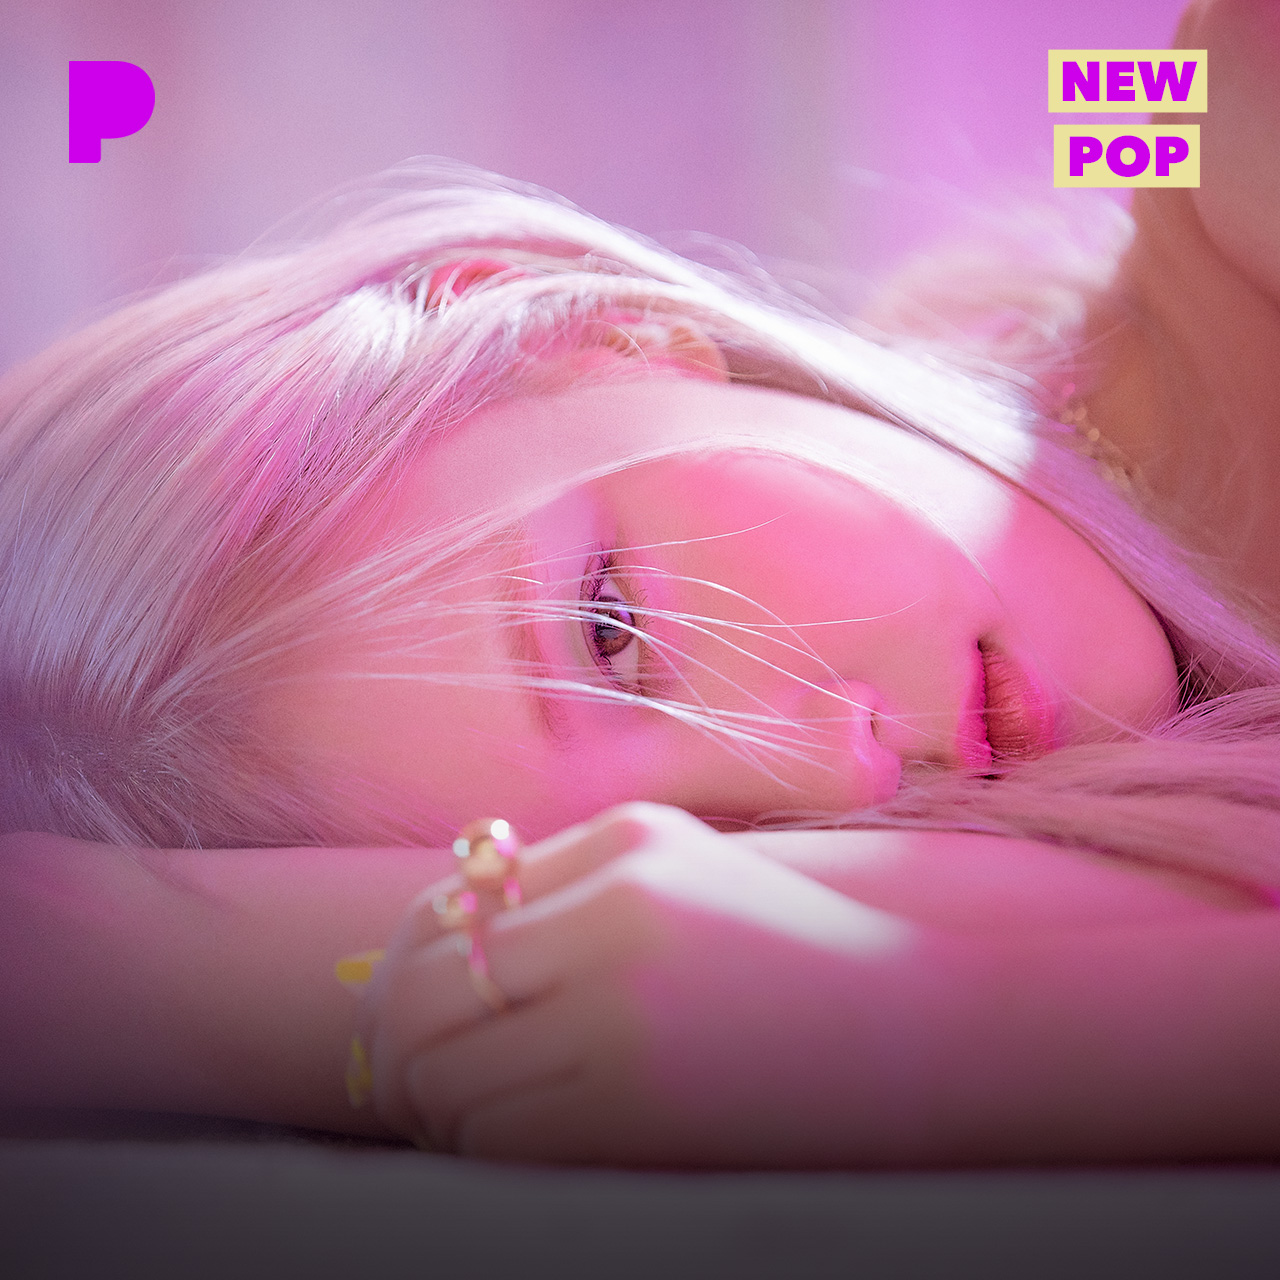 Rosé 'On The Ground' MV, a new 24-hour K-pop female solo record on YouTube